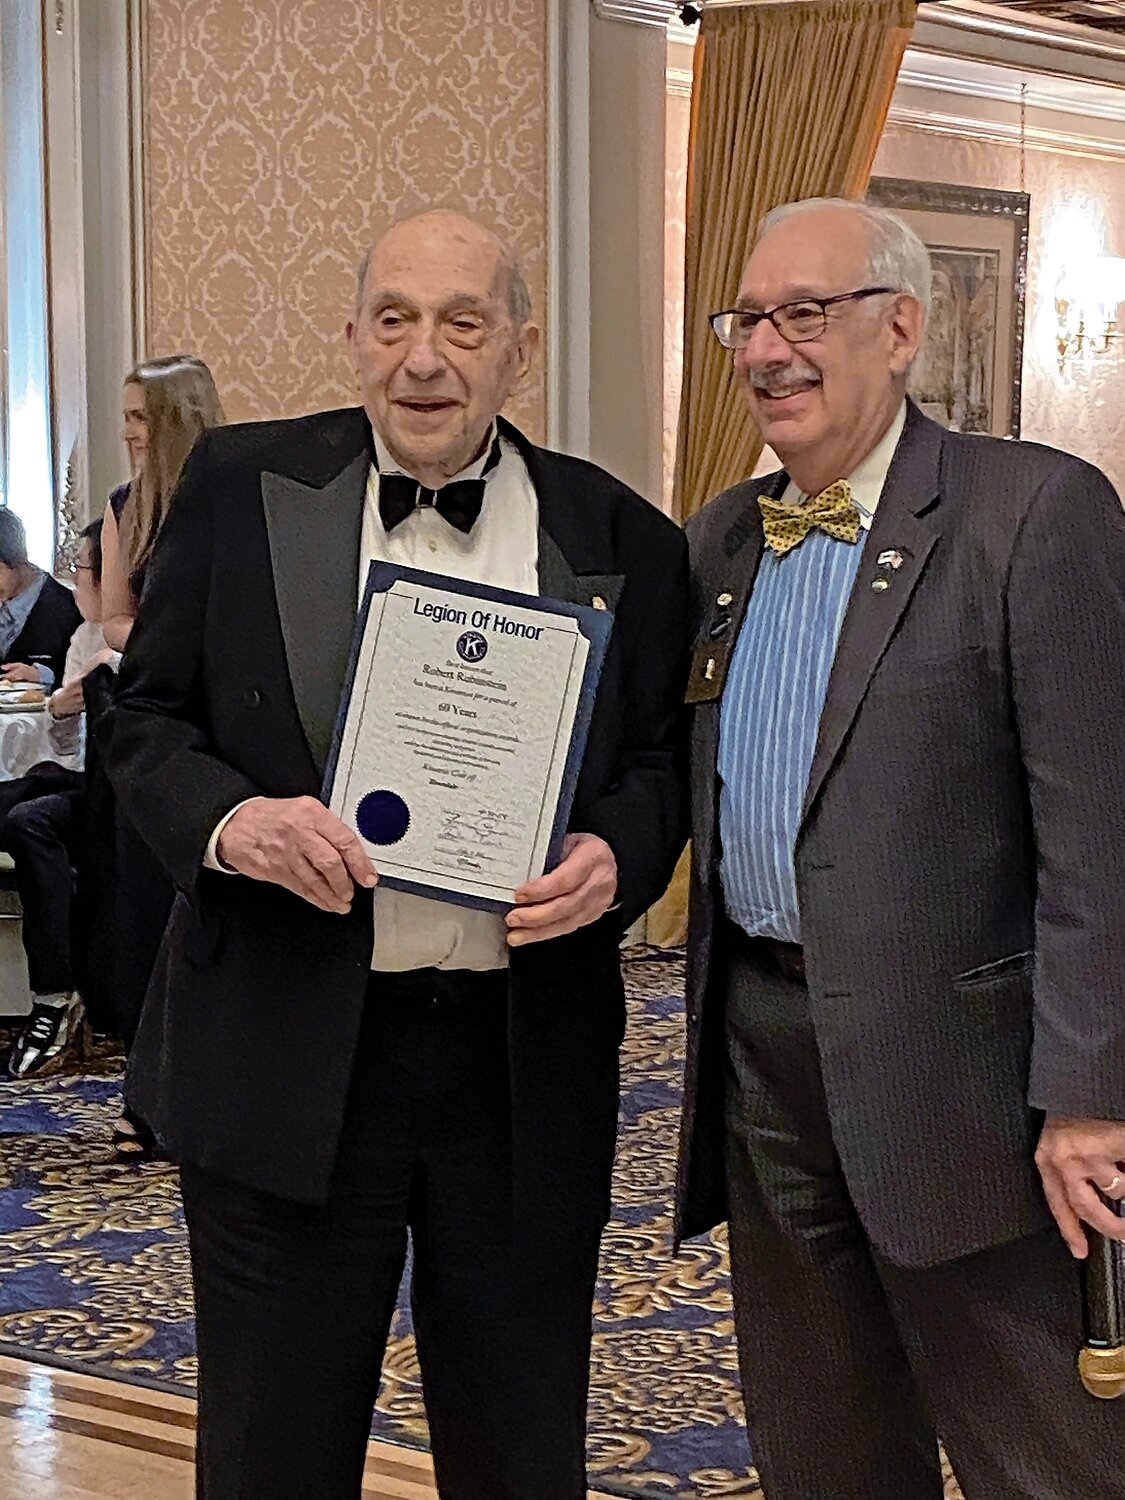 Bob Rubinstein, known for his work on the Riverdale Kiwanis club volunteer efforts and a founder of the Benjamin Franklin Reform Democratic Club, is given a Legion of Honor award by New York state Kiwanis Club governor Joel Harris at the club’s annual gala celebrating its 70th anniversary.